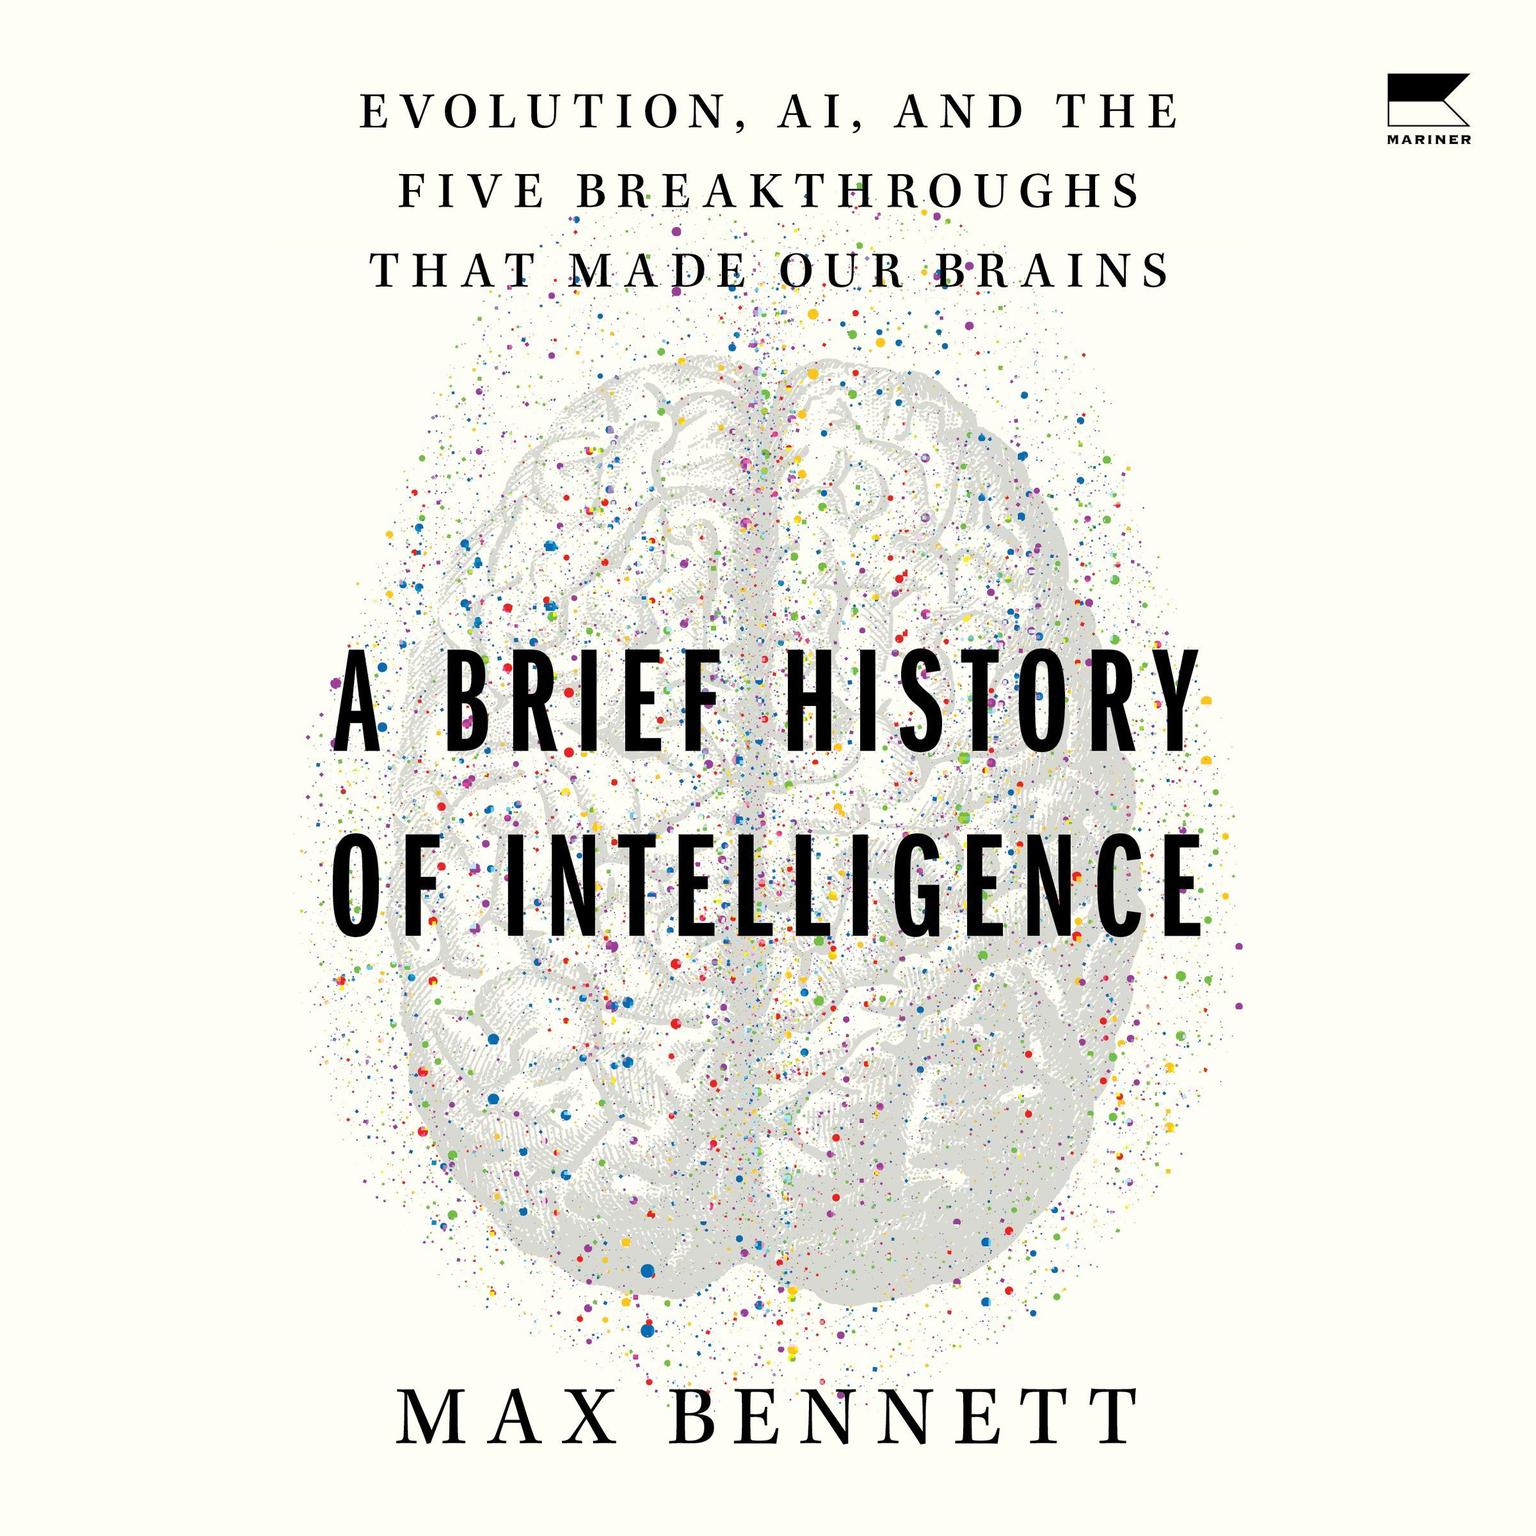 A Brief History of Intelligence: Evolution, AI, and the Five Breakthroughs That Made Our Brains Audiobook, by Max Solomon Bennett